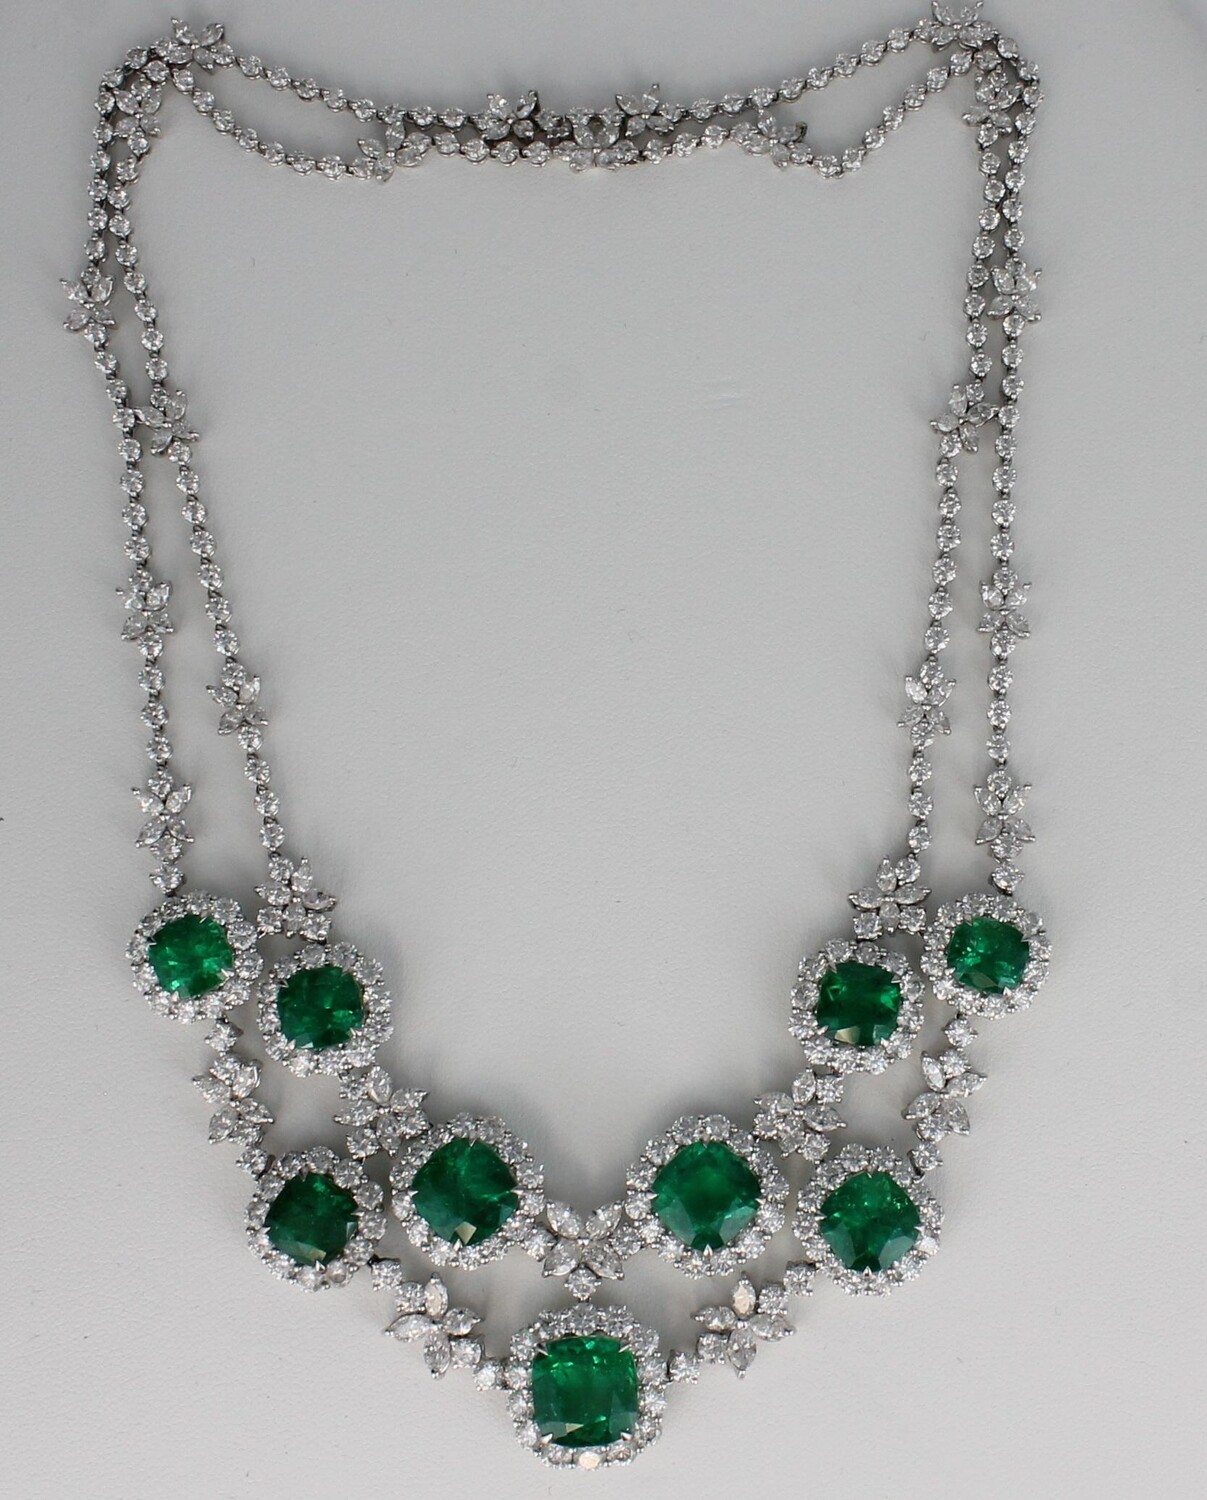 18KT WHITE GOLD NECKLACE WITH 31.7 CT TW EMERALDS & 20.0 CT TW DIAMOND NECKLACE